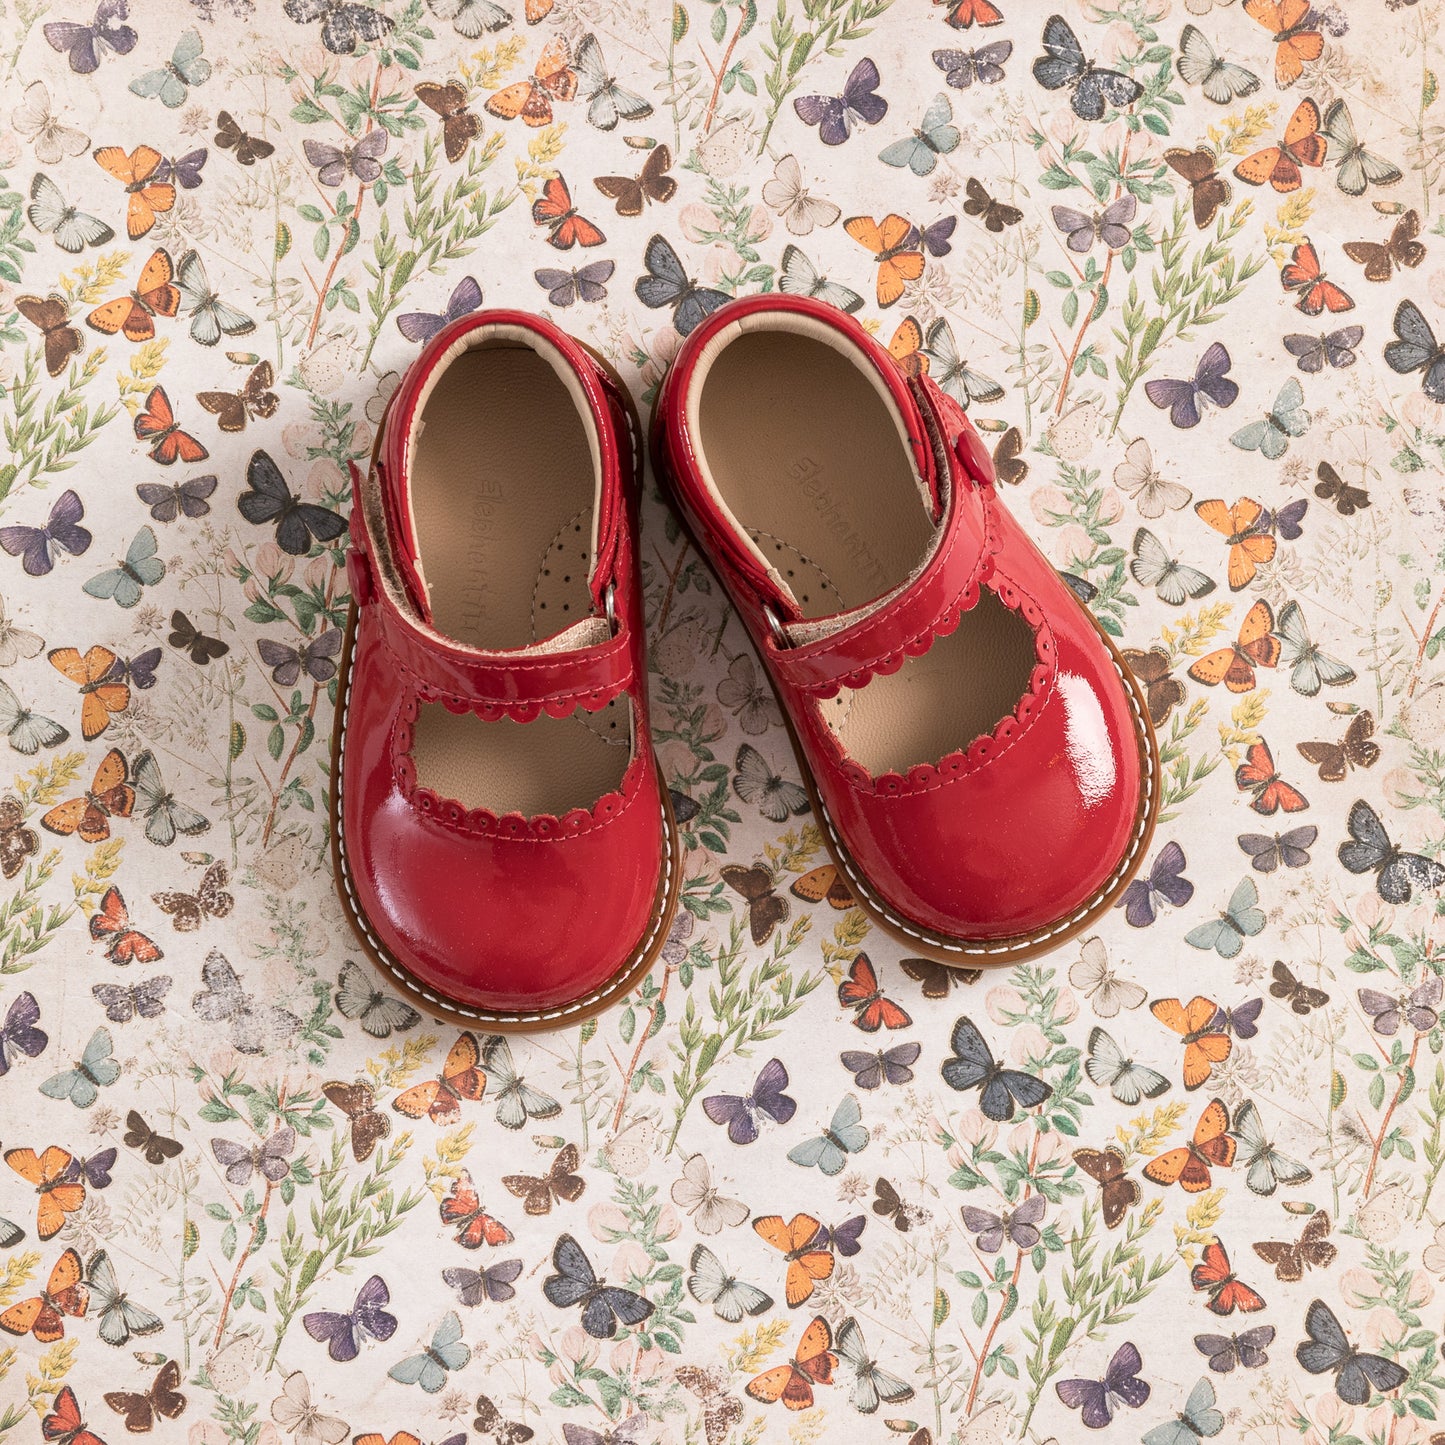 Mary Jane Toddler Patent Red